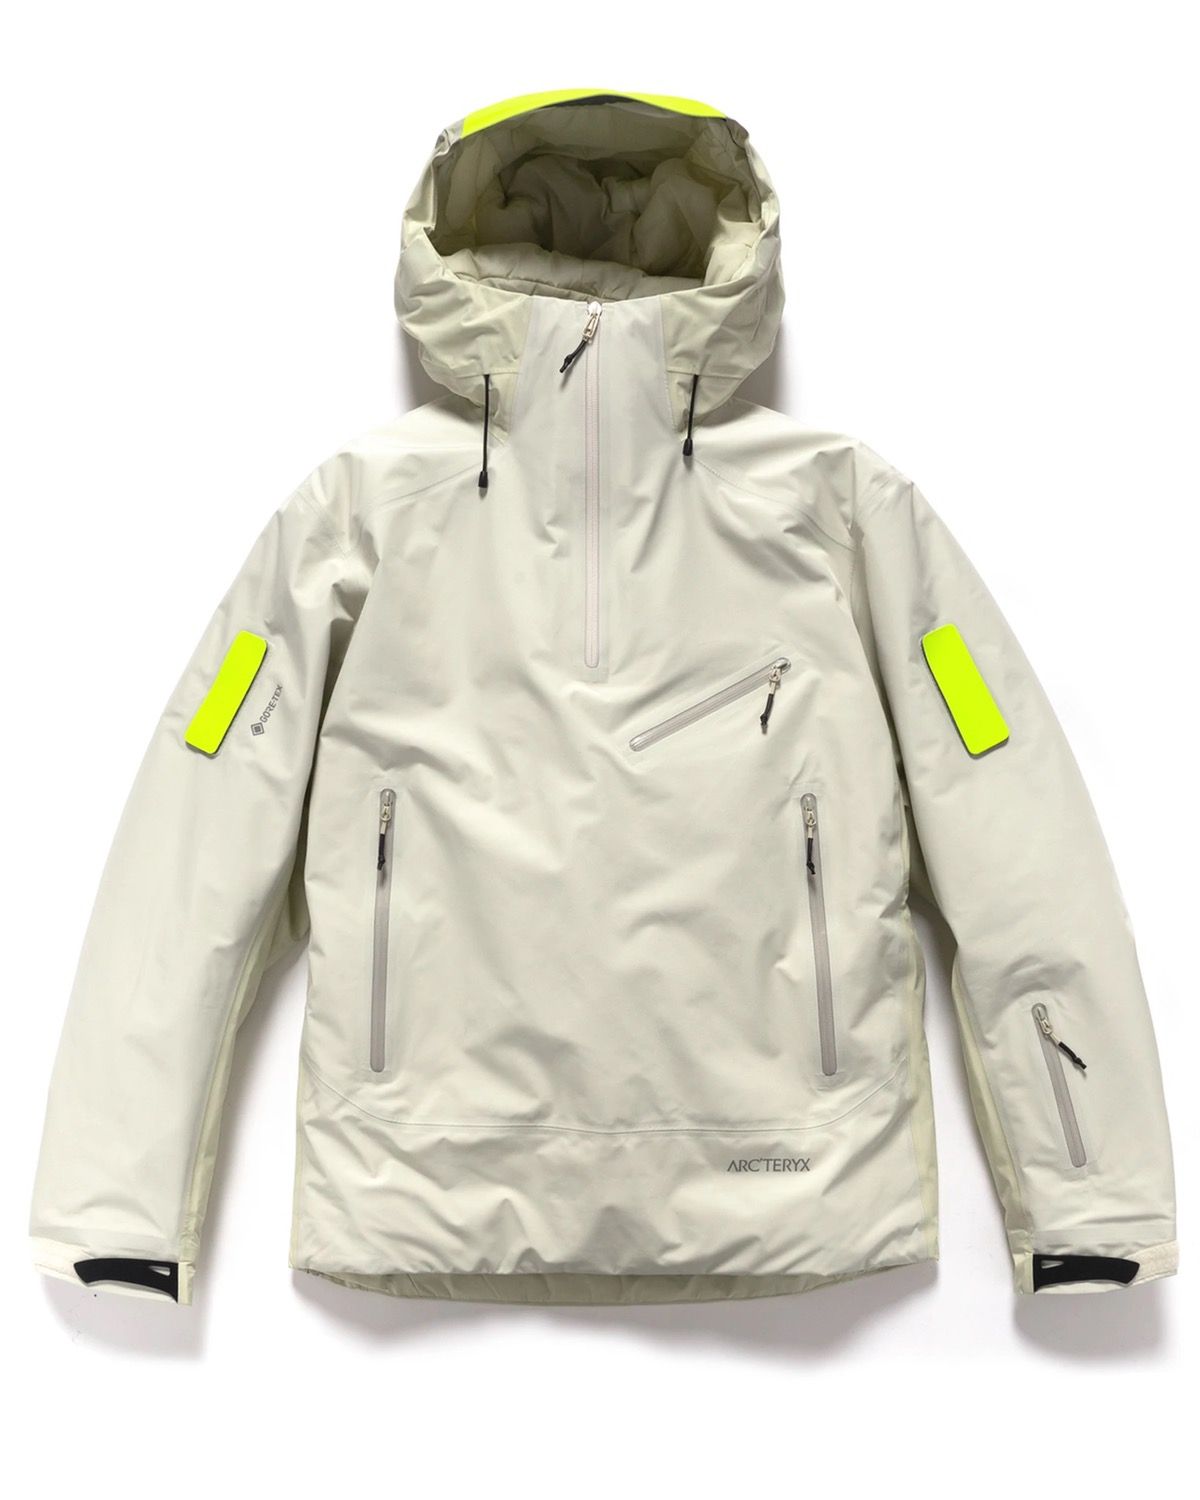 AXIS INSULATED Jacket System_A Arcteryx-